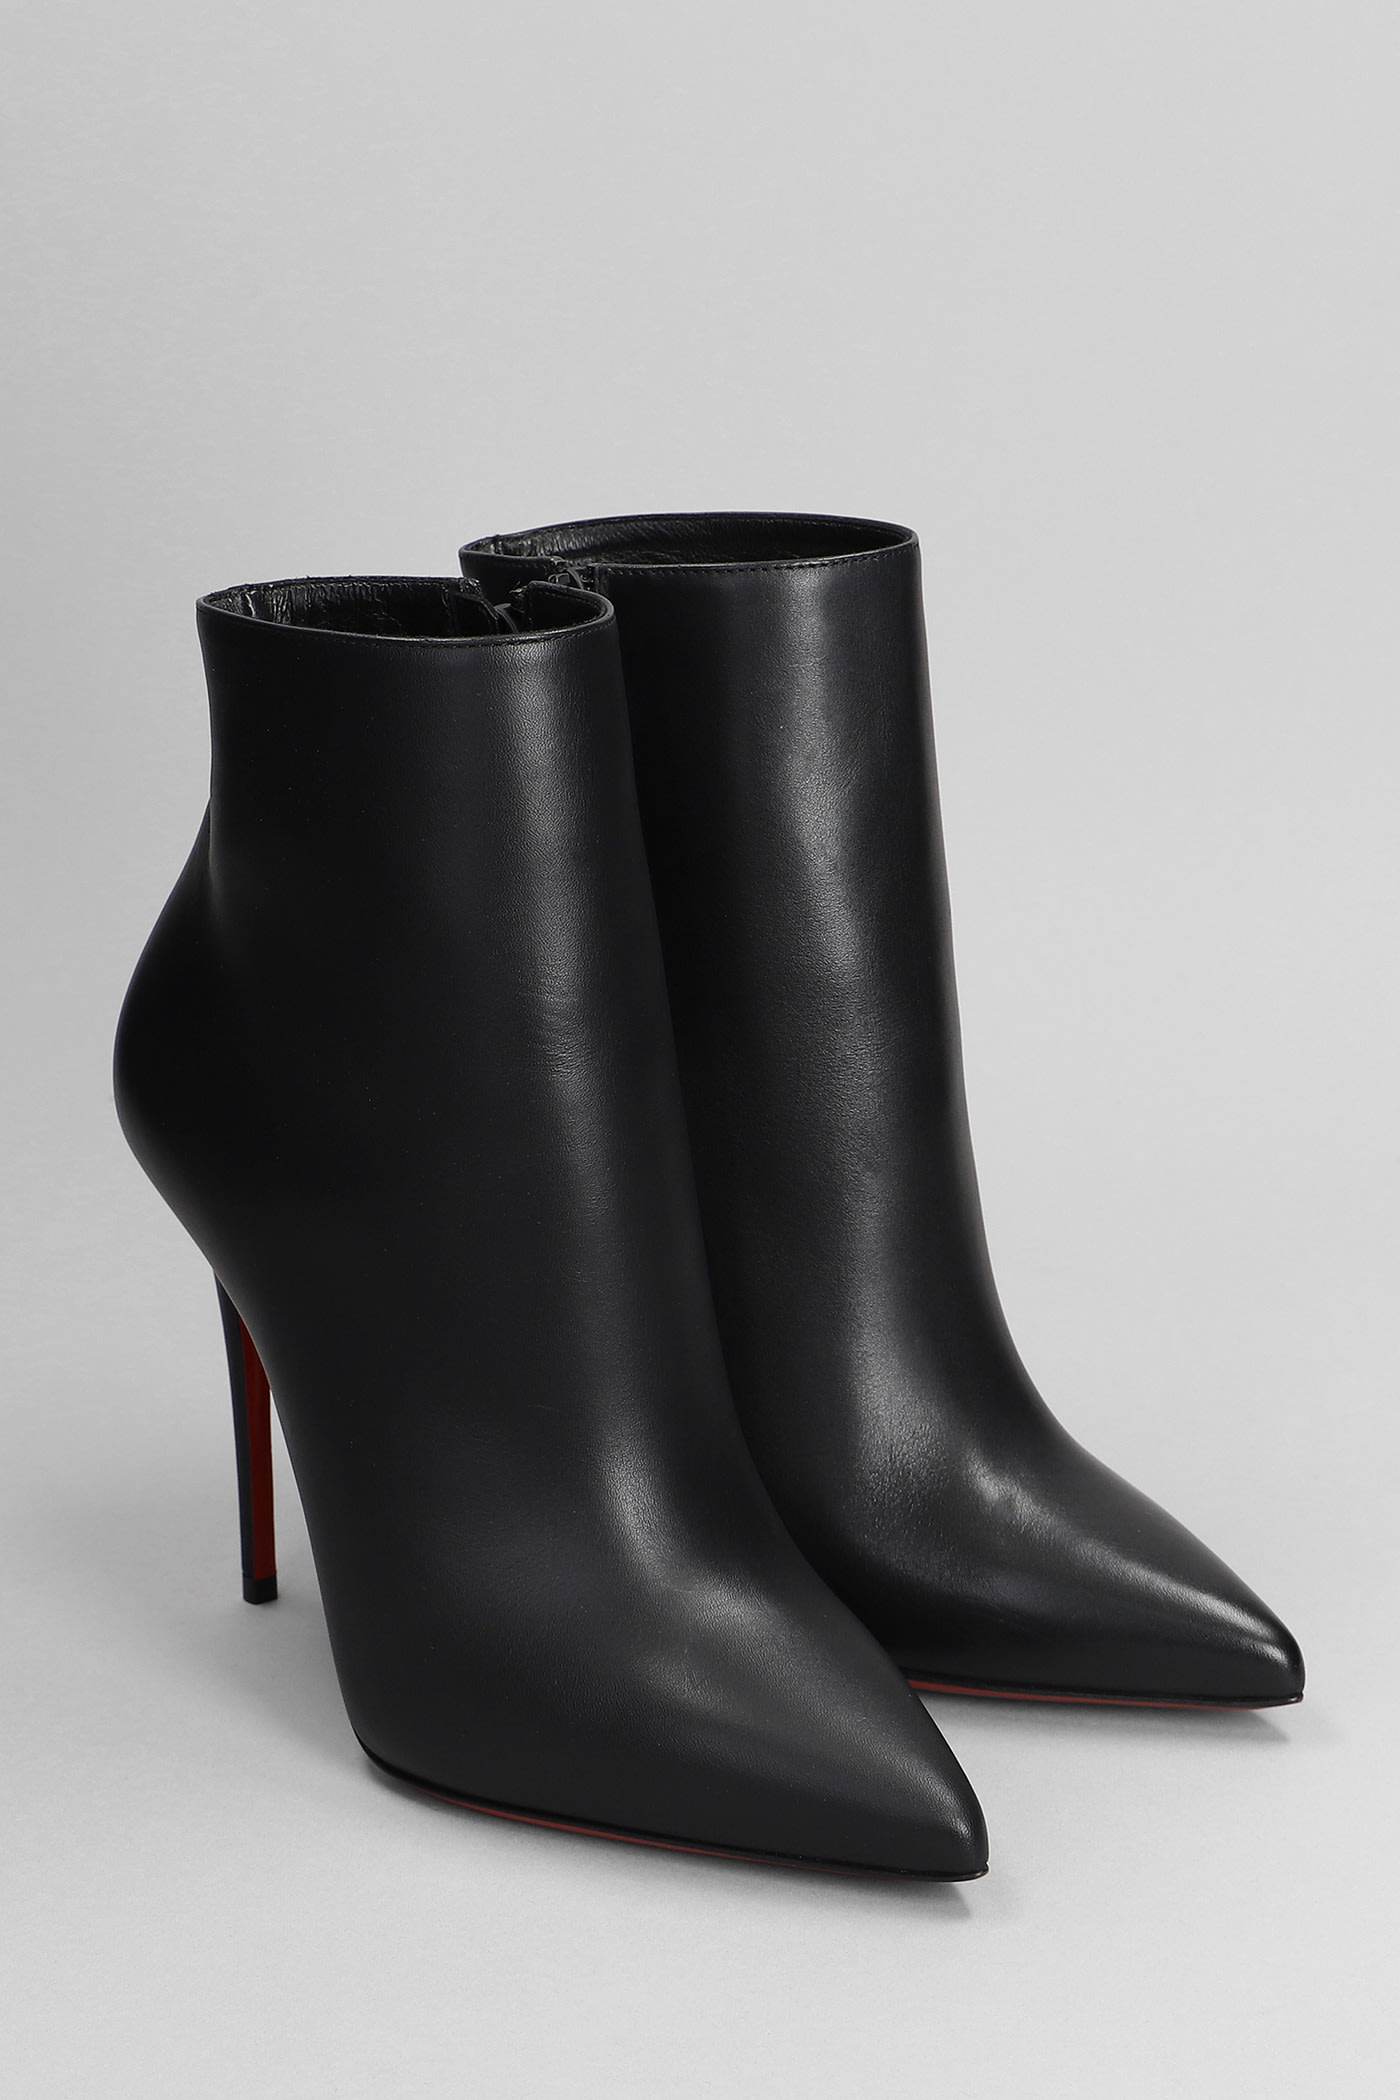 Shop Christian Louboutin So Kate Booty High Heels Ankle Boots In Black Leather